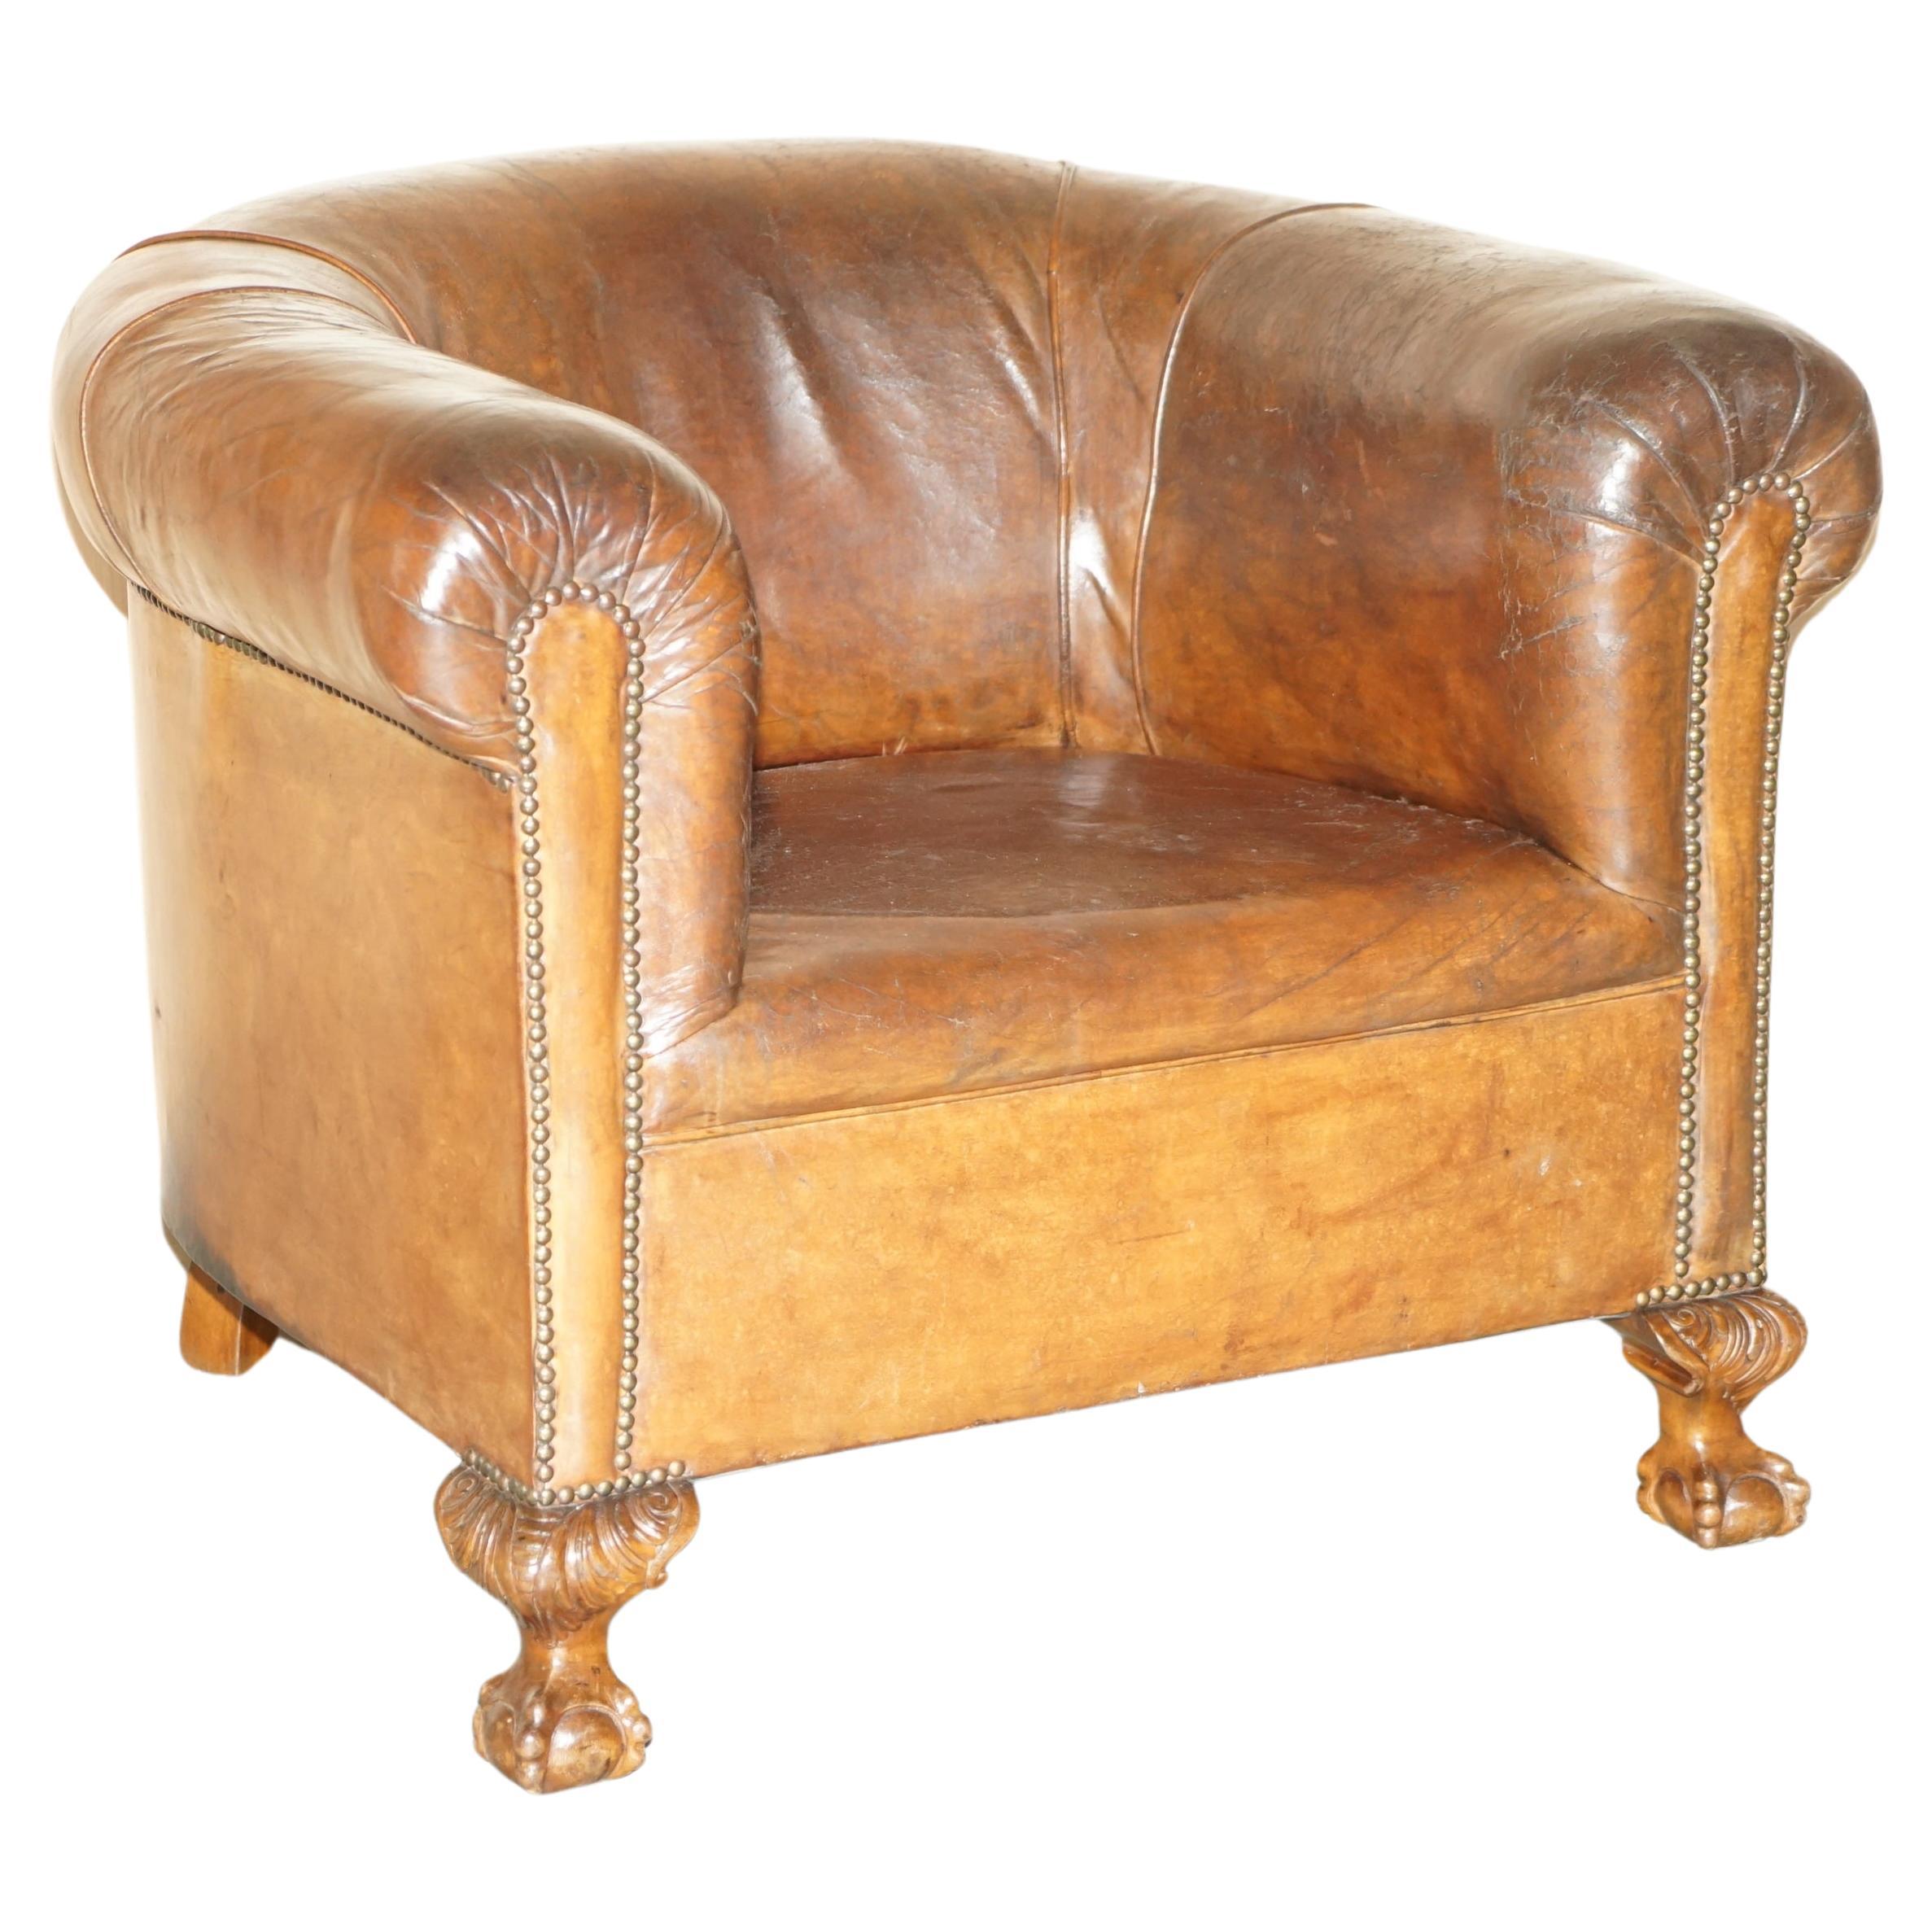 Antique circa 1880 Hand Carved Claw & Ball Feet Brown Leather Club Tub Armchair For Sale